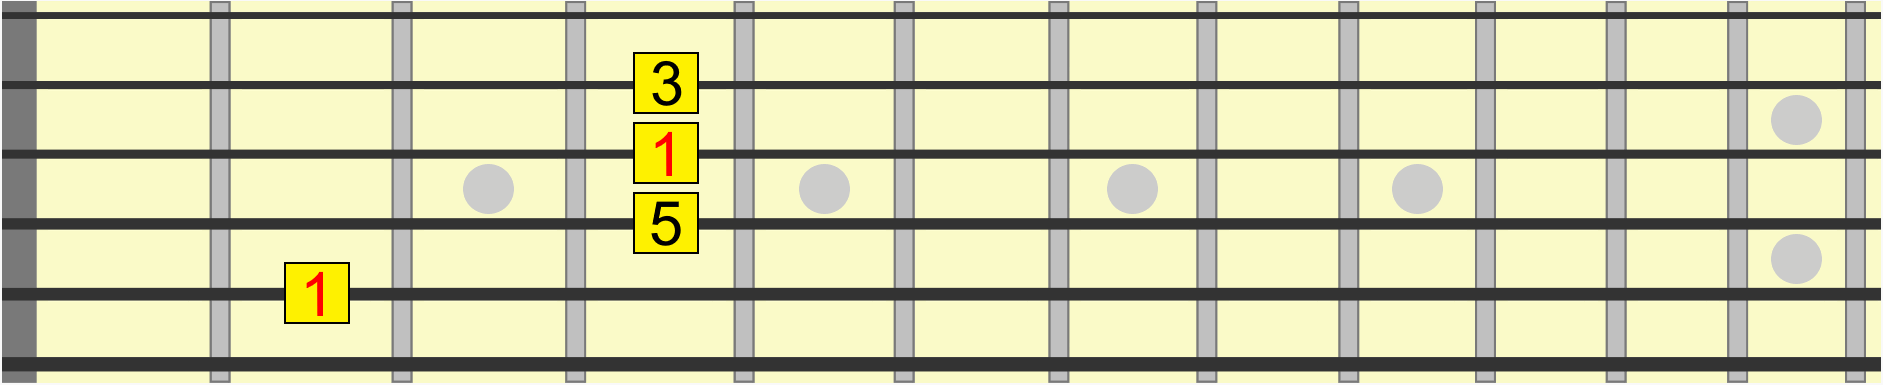 major chord intervals on B, D, E and G